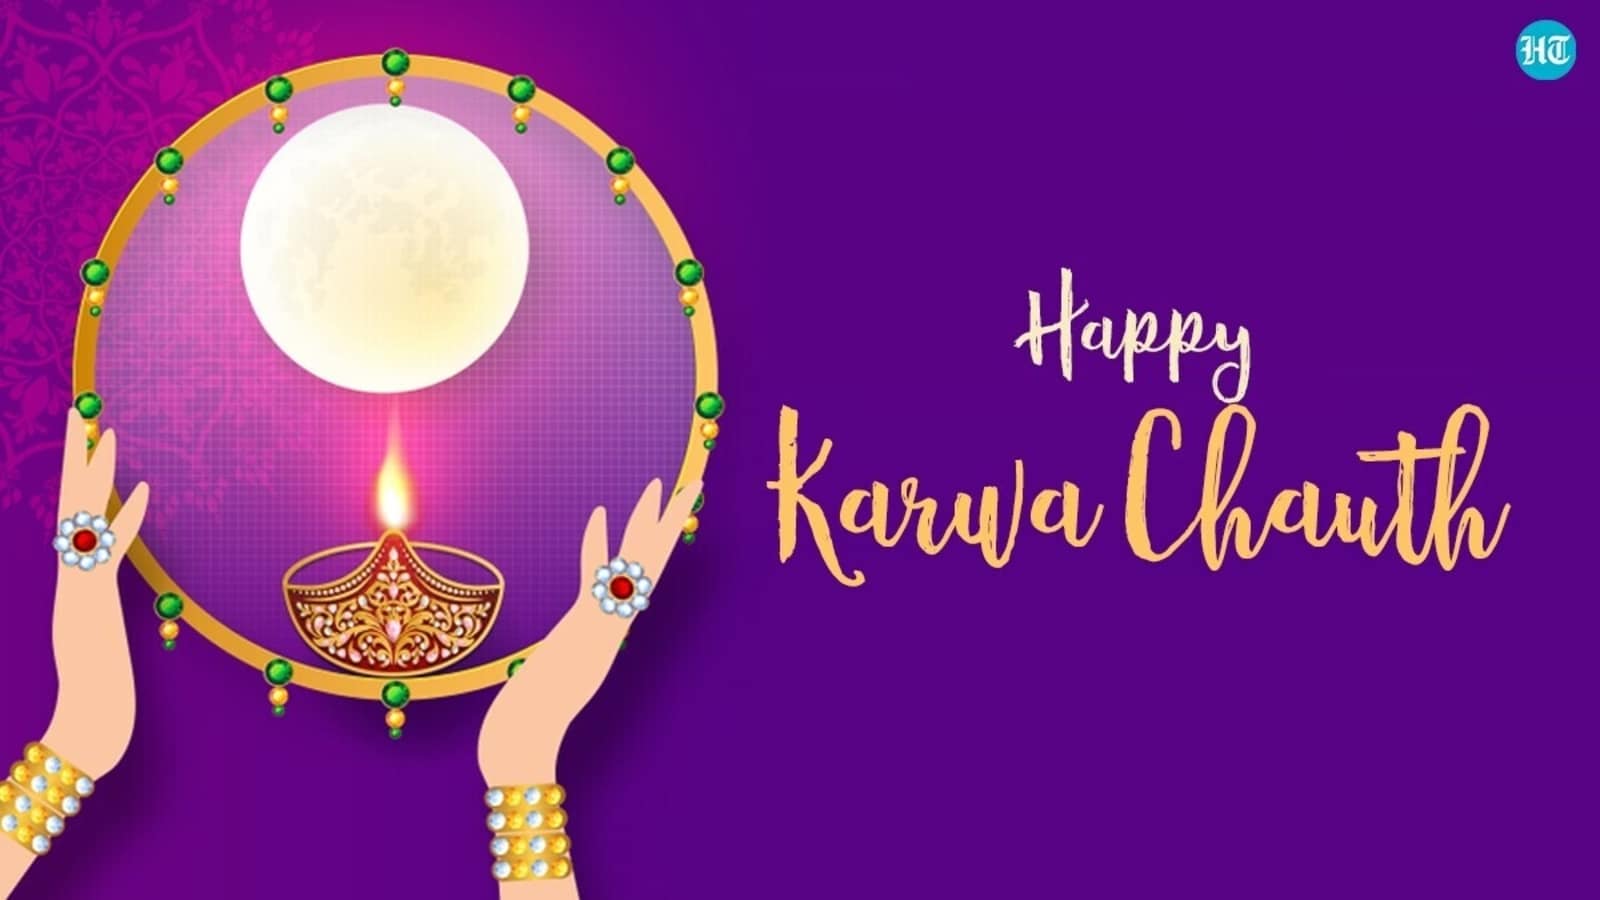 Happy karwa chauth wishes send best wishes images messages and greetings to loved ones on october